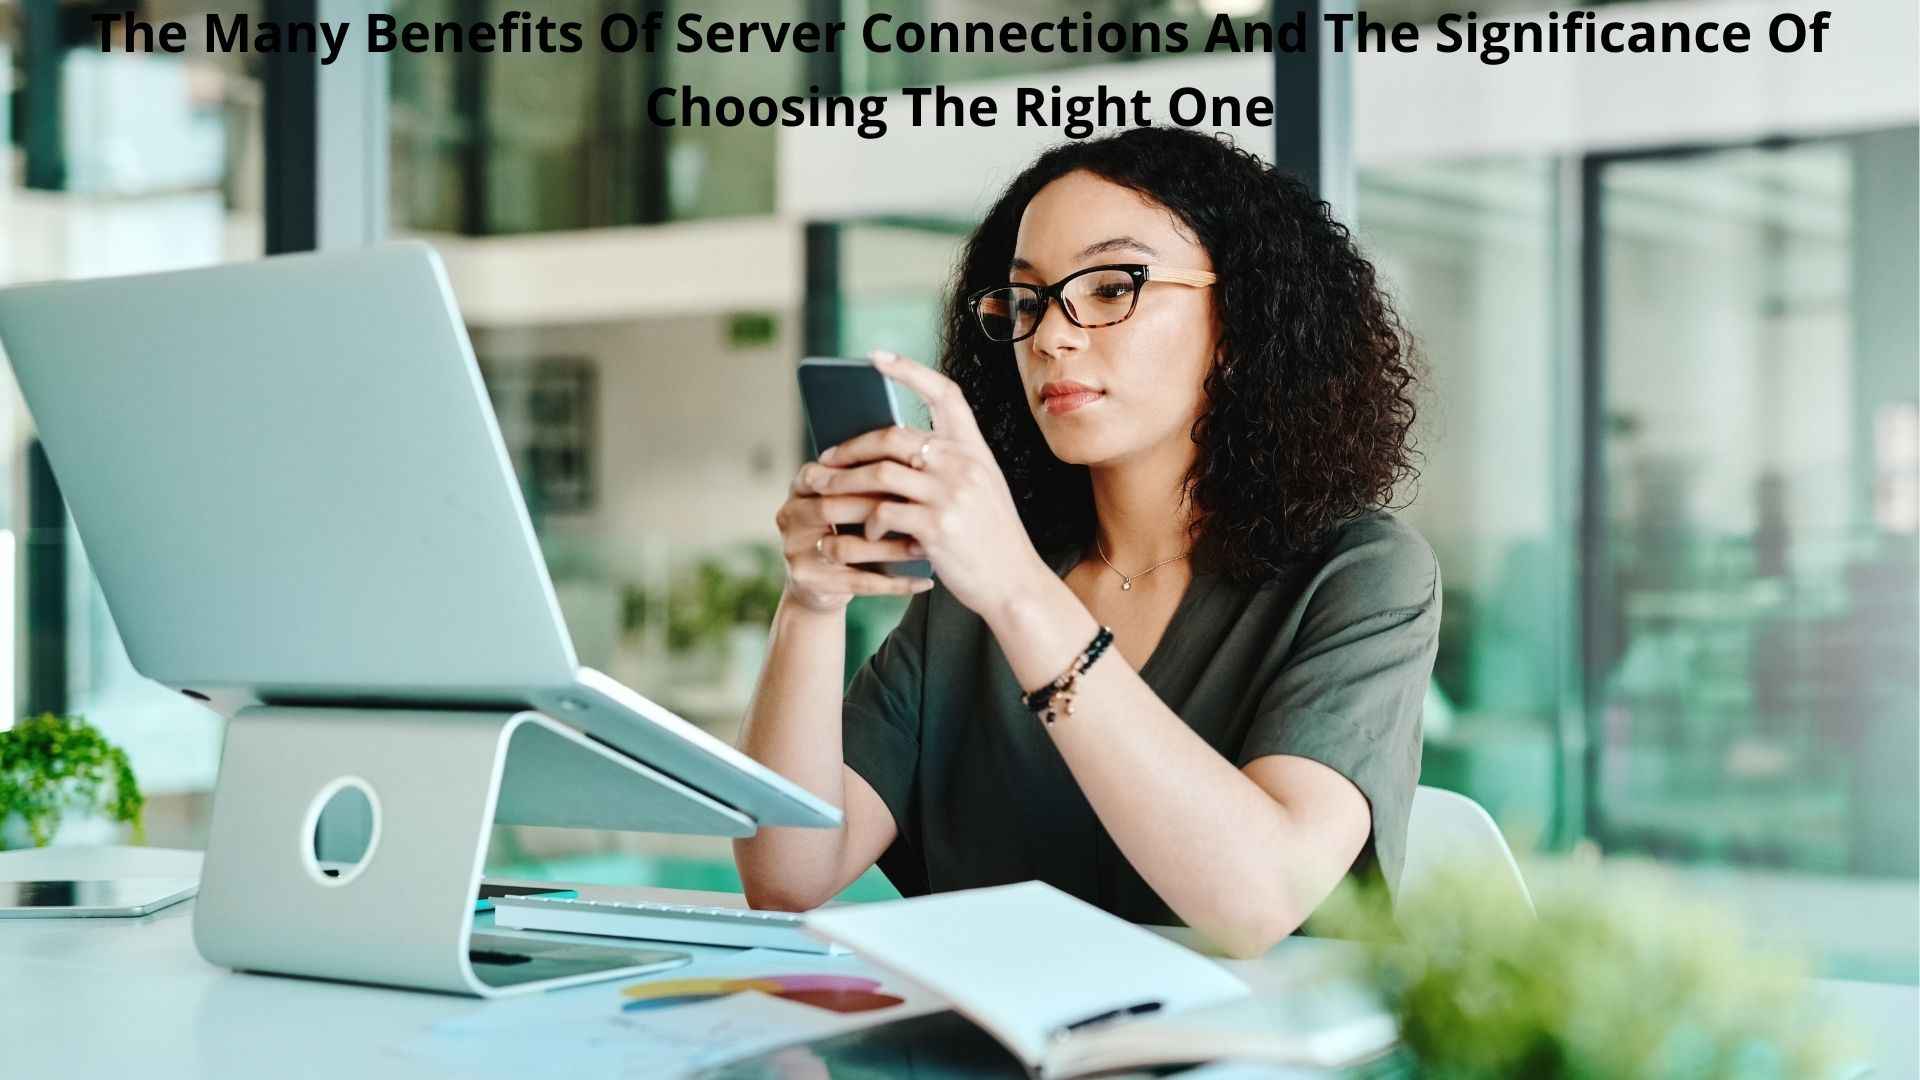 The Many Benefits Of Server Connections And The Significance Of Choosing The Right One